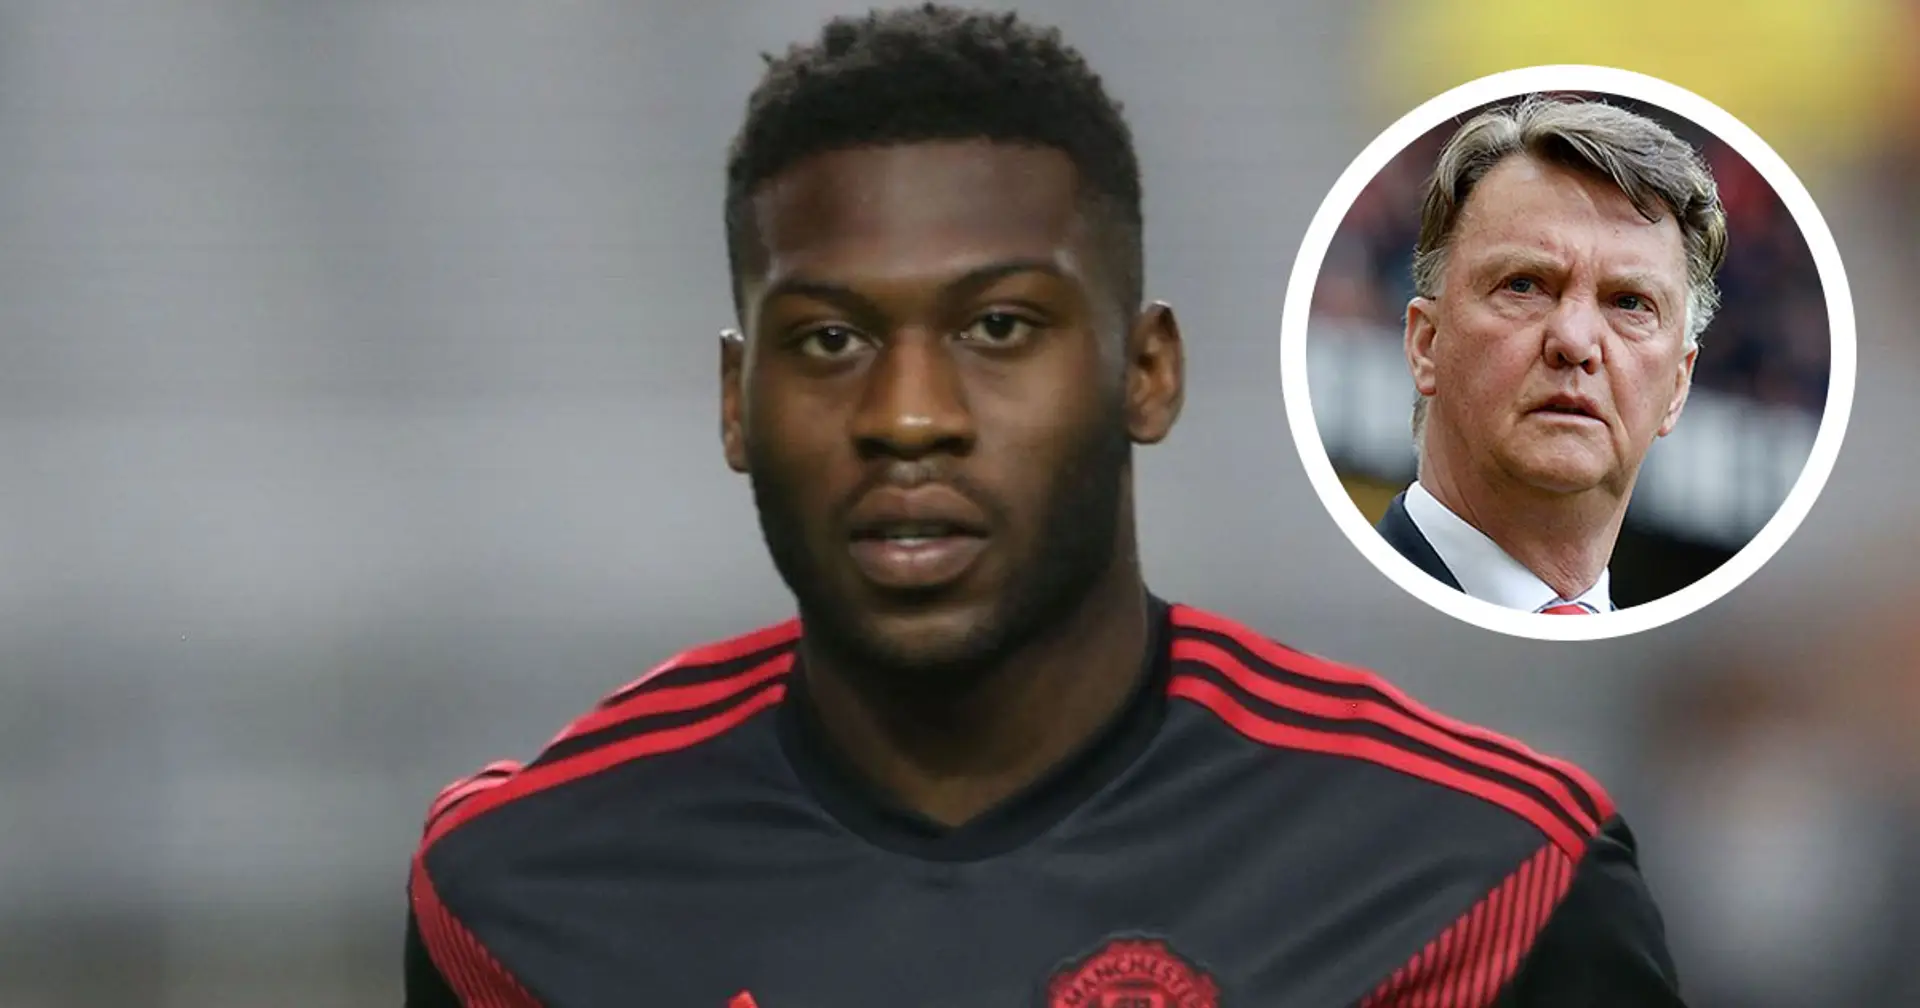 'The player who always closed the door for us': What Louis van Gaal said of Fosu-Mensah naming his best role